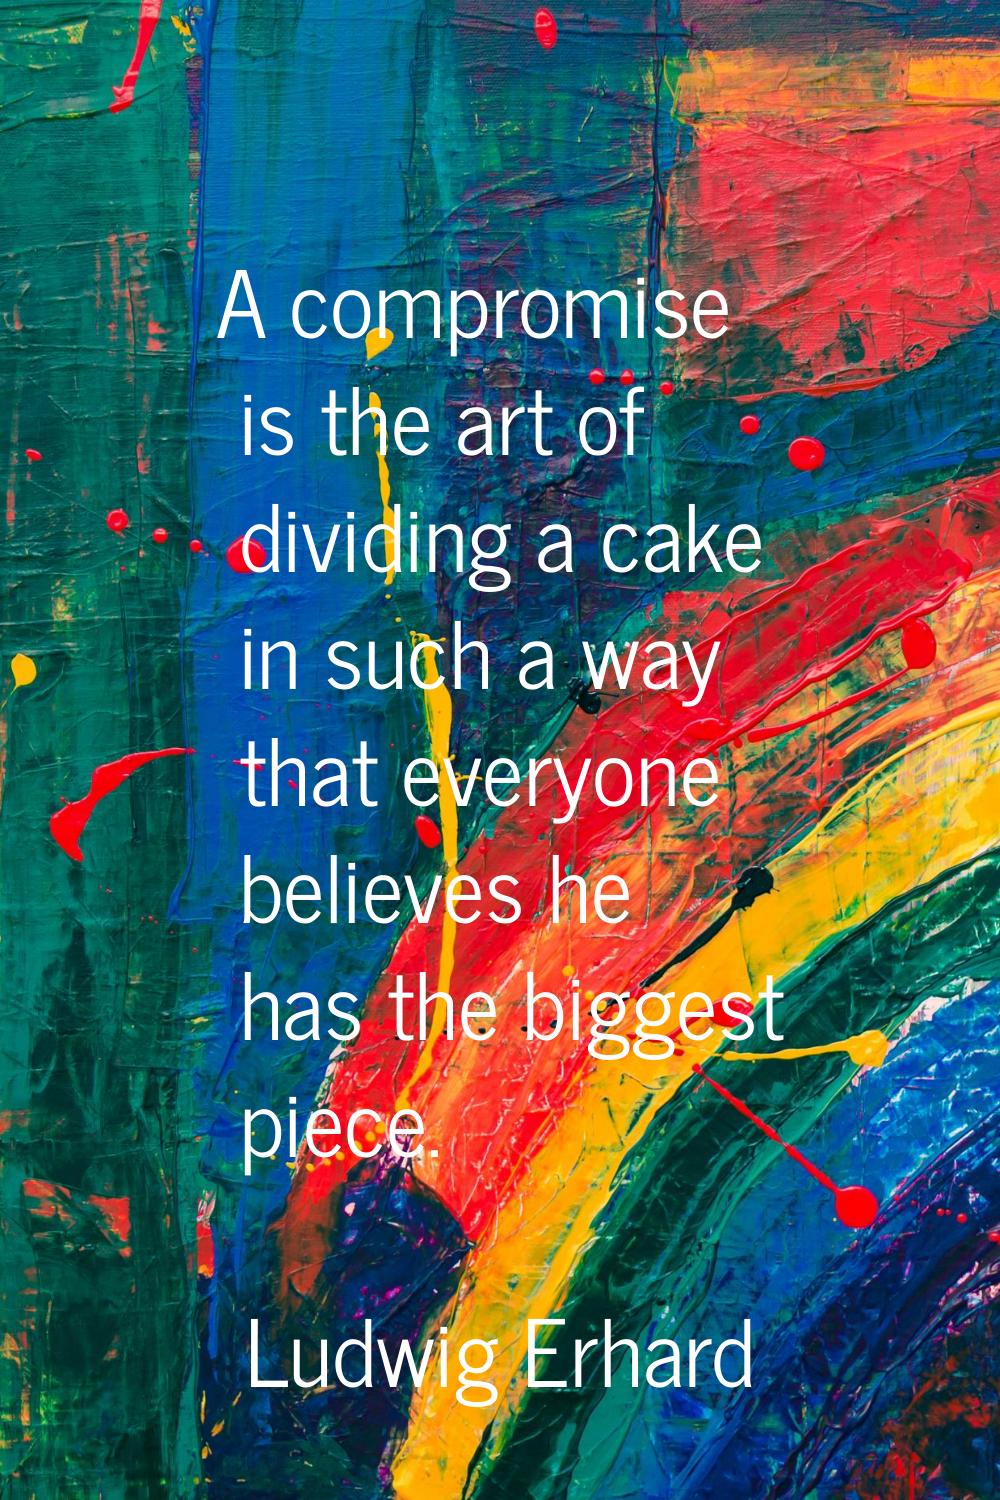 A compromise is the art of dividing a cake in such a way that everyone believes he has the biggest 